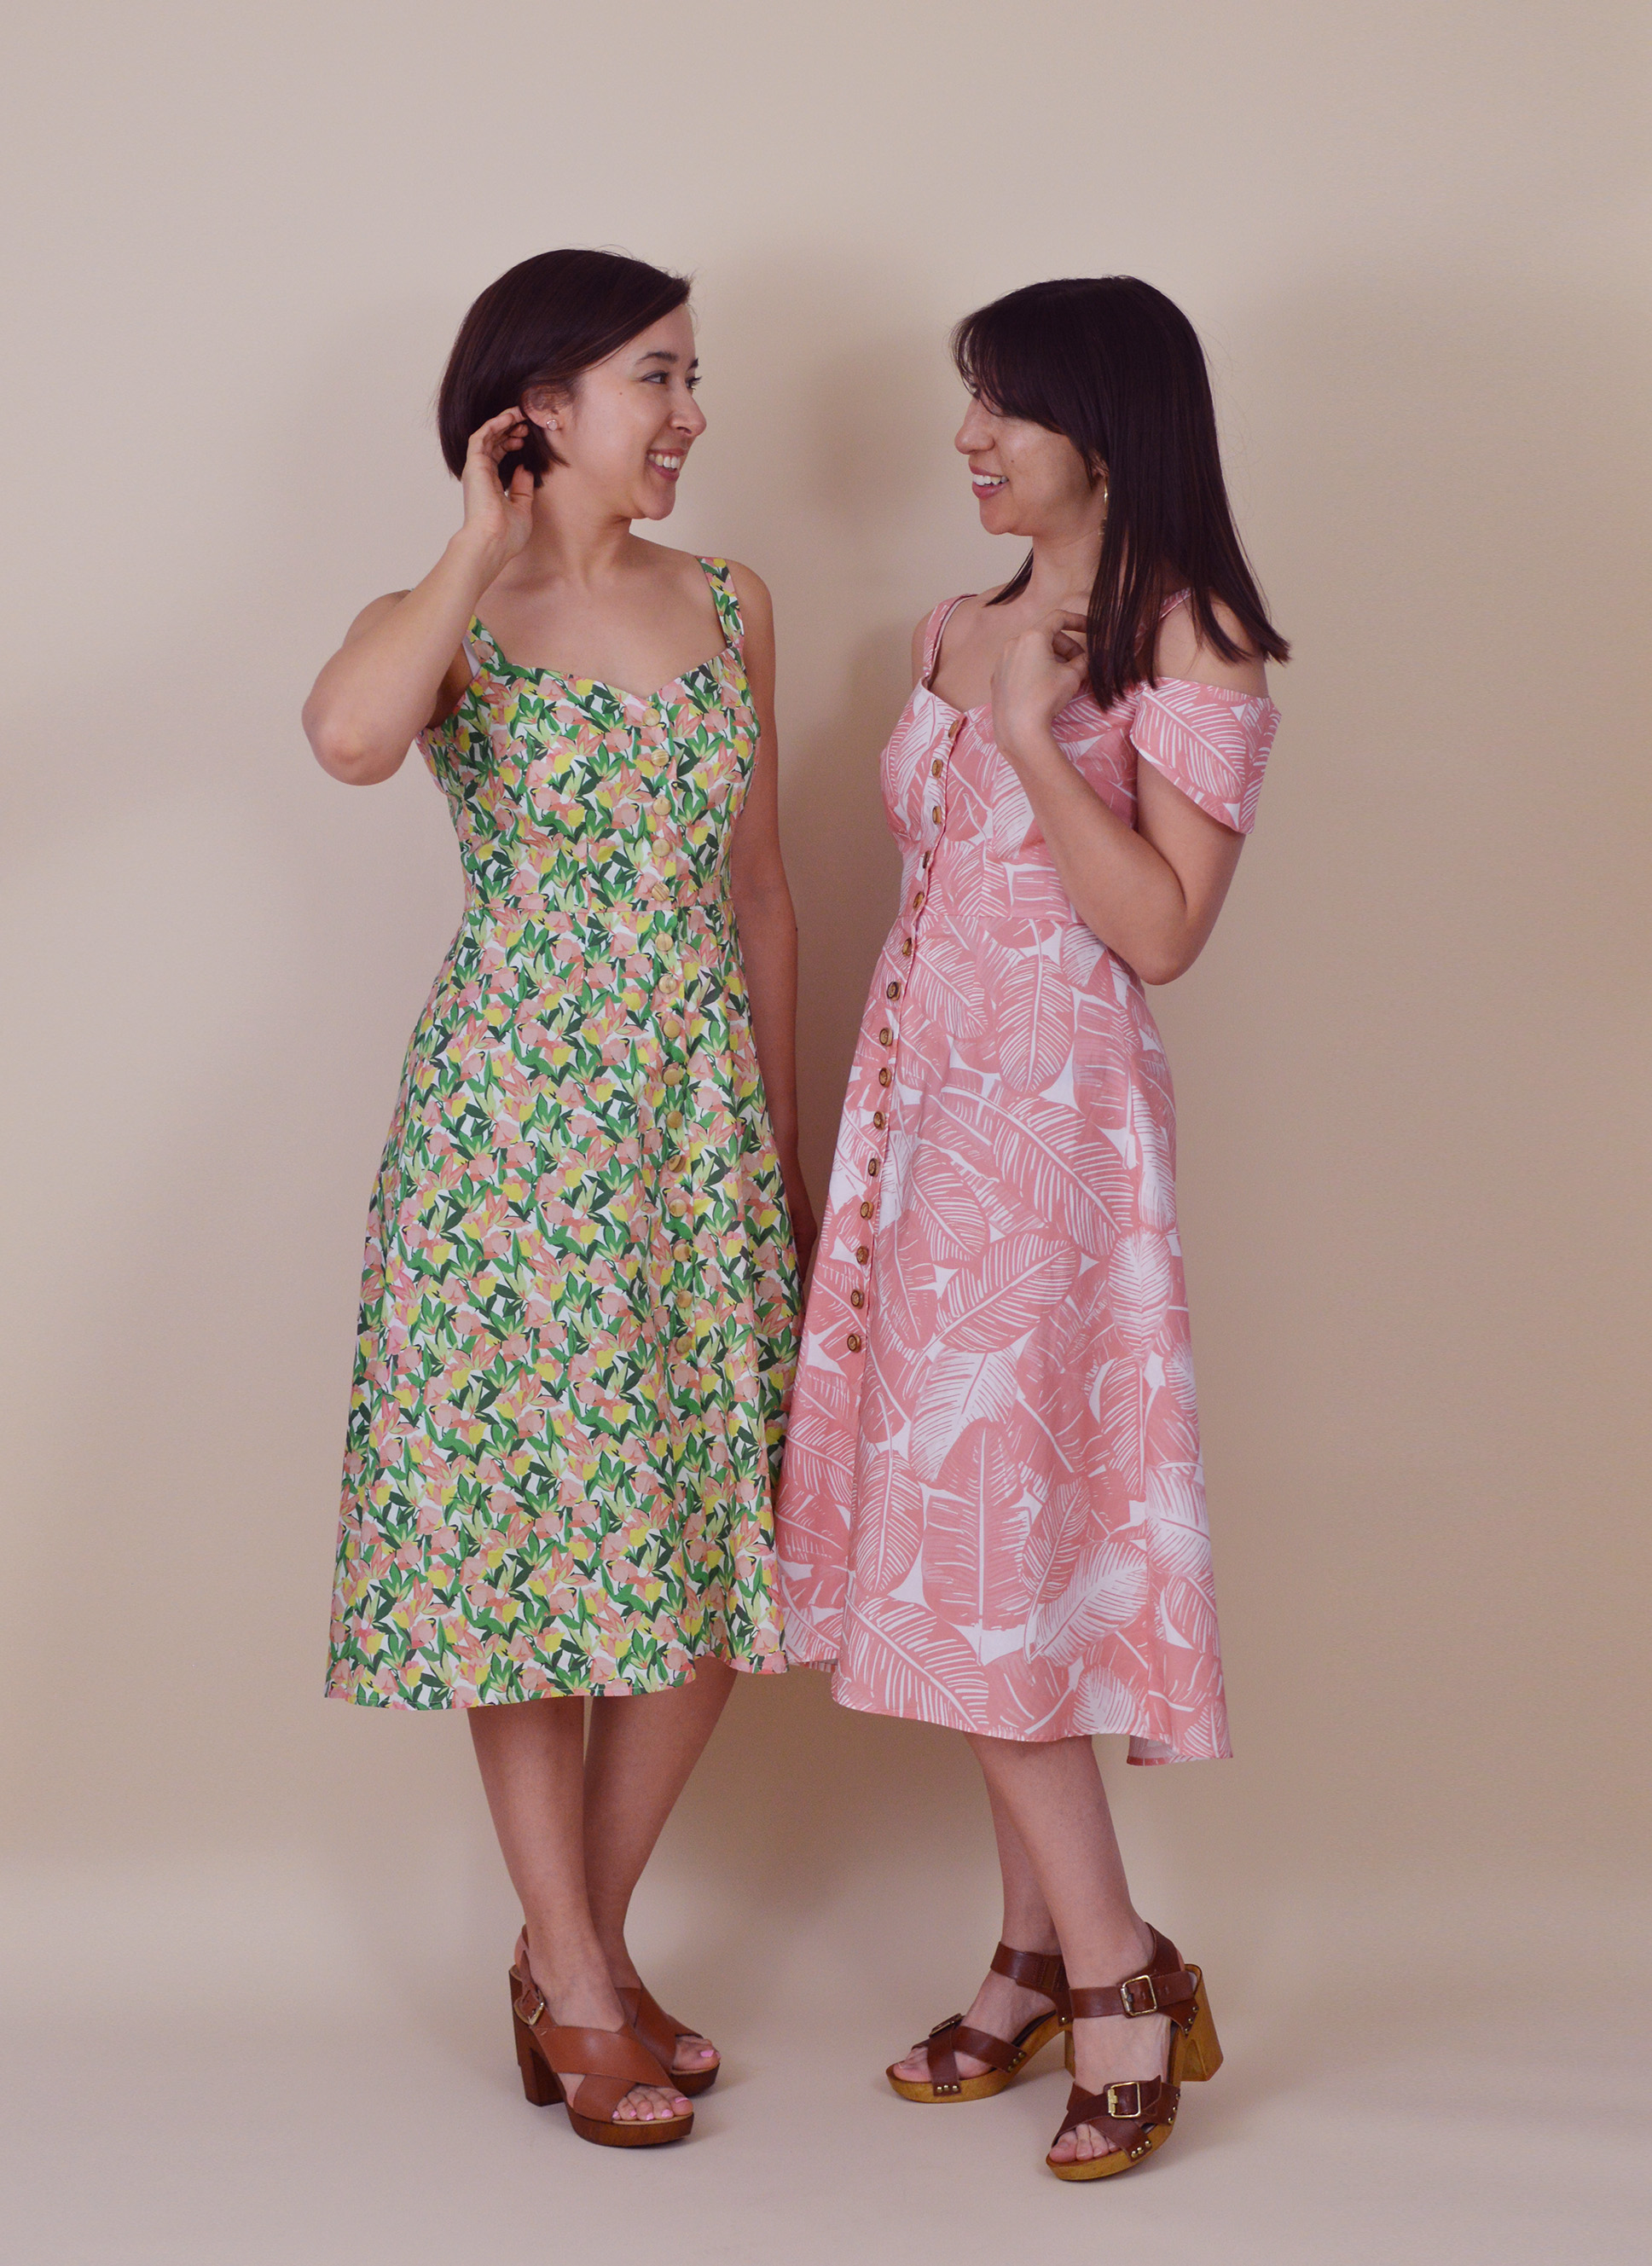 Women wearing the Kew Dresses sewing pattern from Nina Lee on The Fold Line. A fit and flare dress pattern made in rayon, viscose, crepe, linen blends, lightweight cotton, denim or corduroy fabrics, featuring shoulder straps with optional cold shoulder short sleeves, square neckline with a central V dip, full length button front closure and high low hemline.